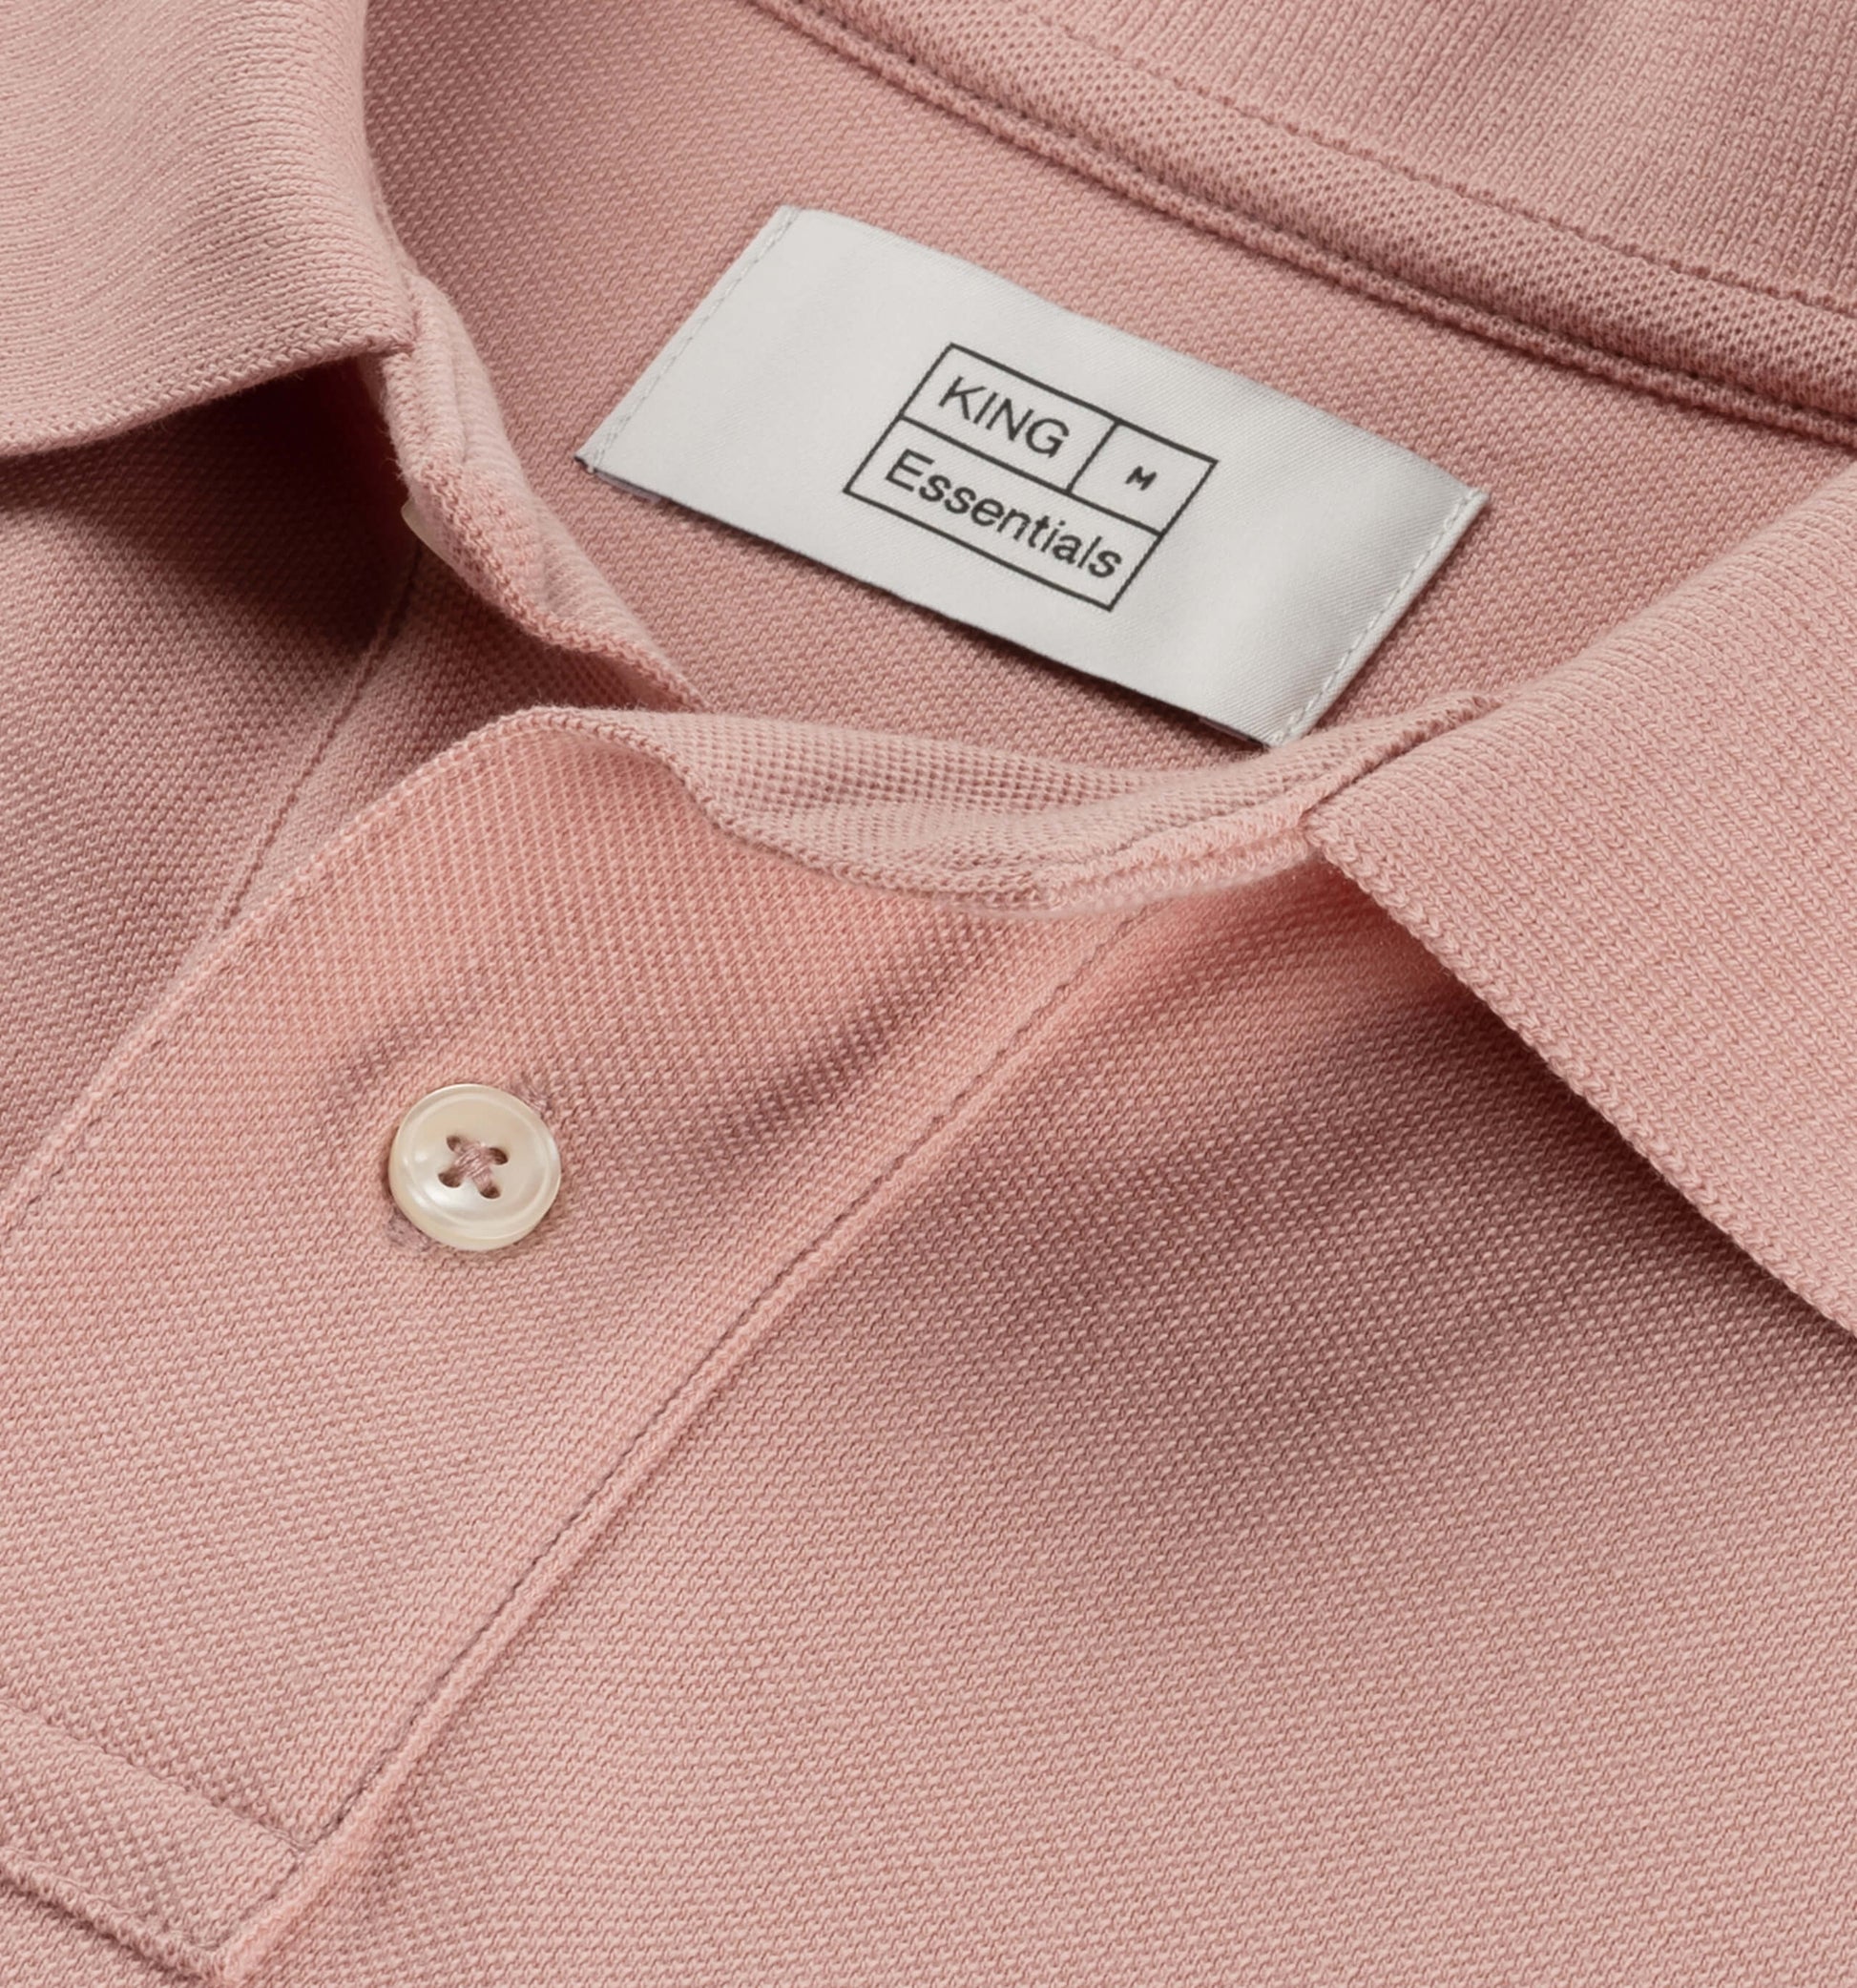 The Rene - Pique Polo In Dark Pink From King Essentials